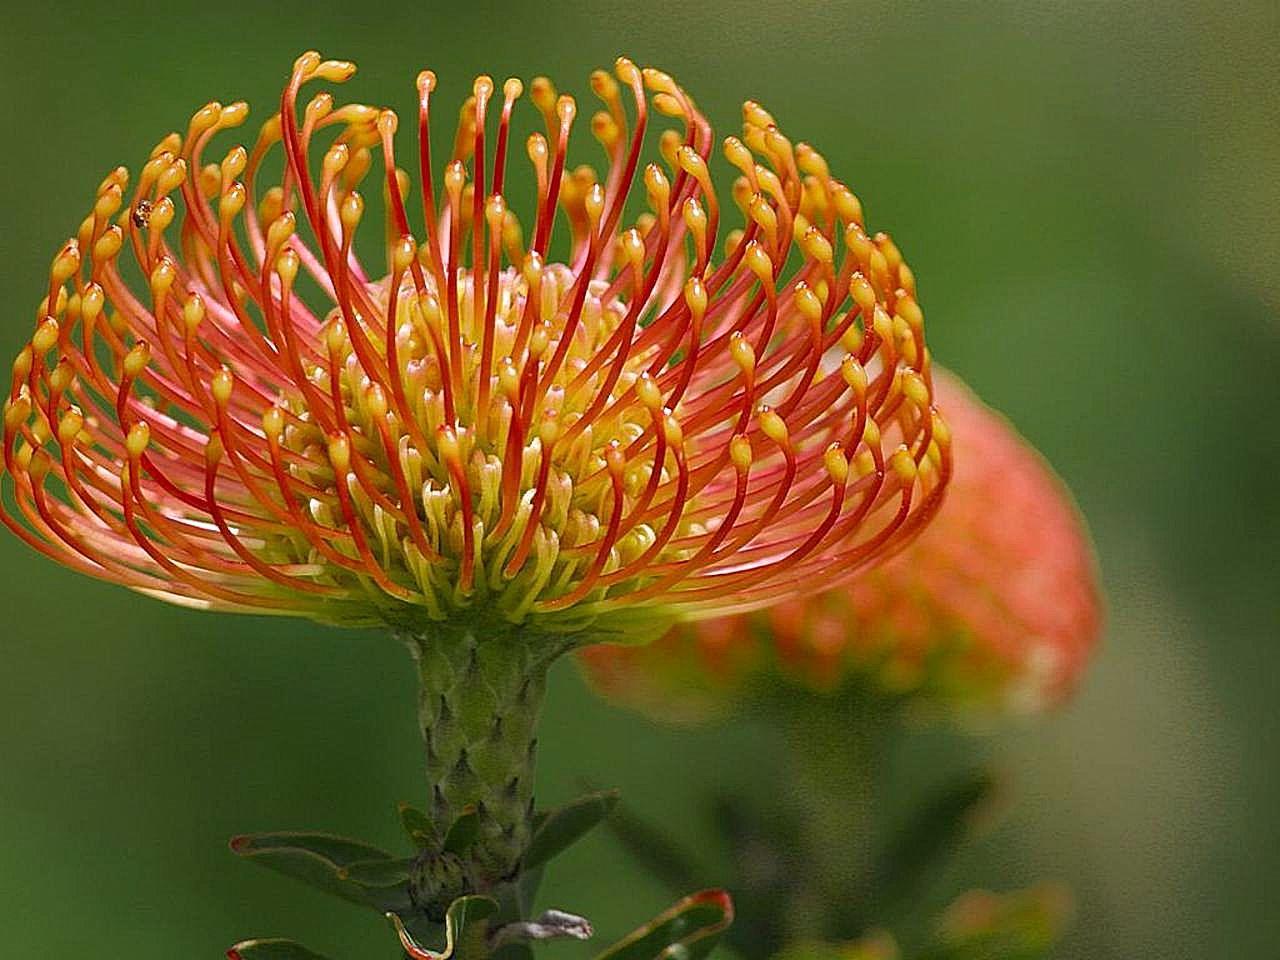 flowers for flower lovers.: Pincushion protea flowers picture